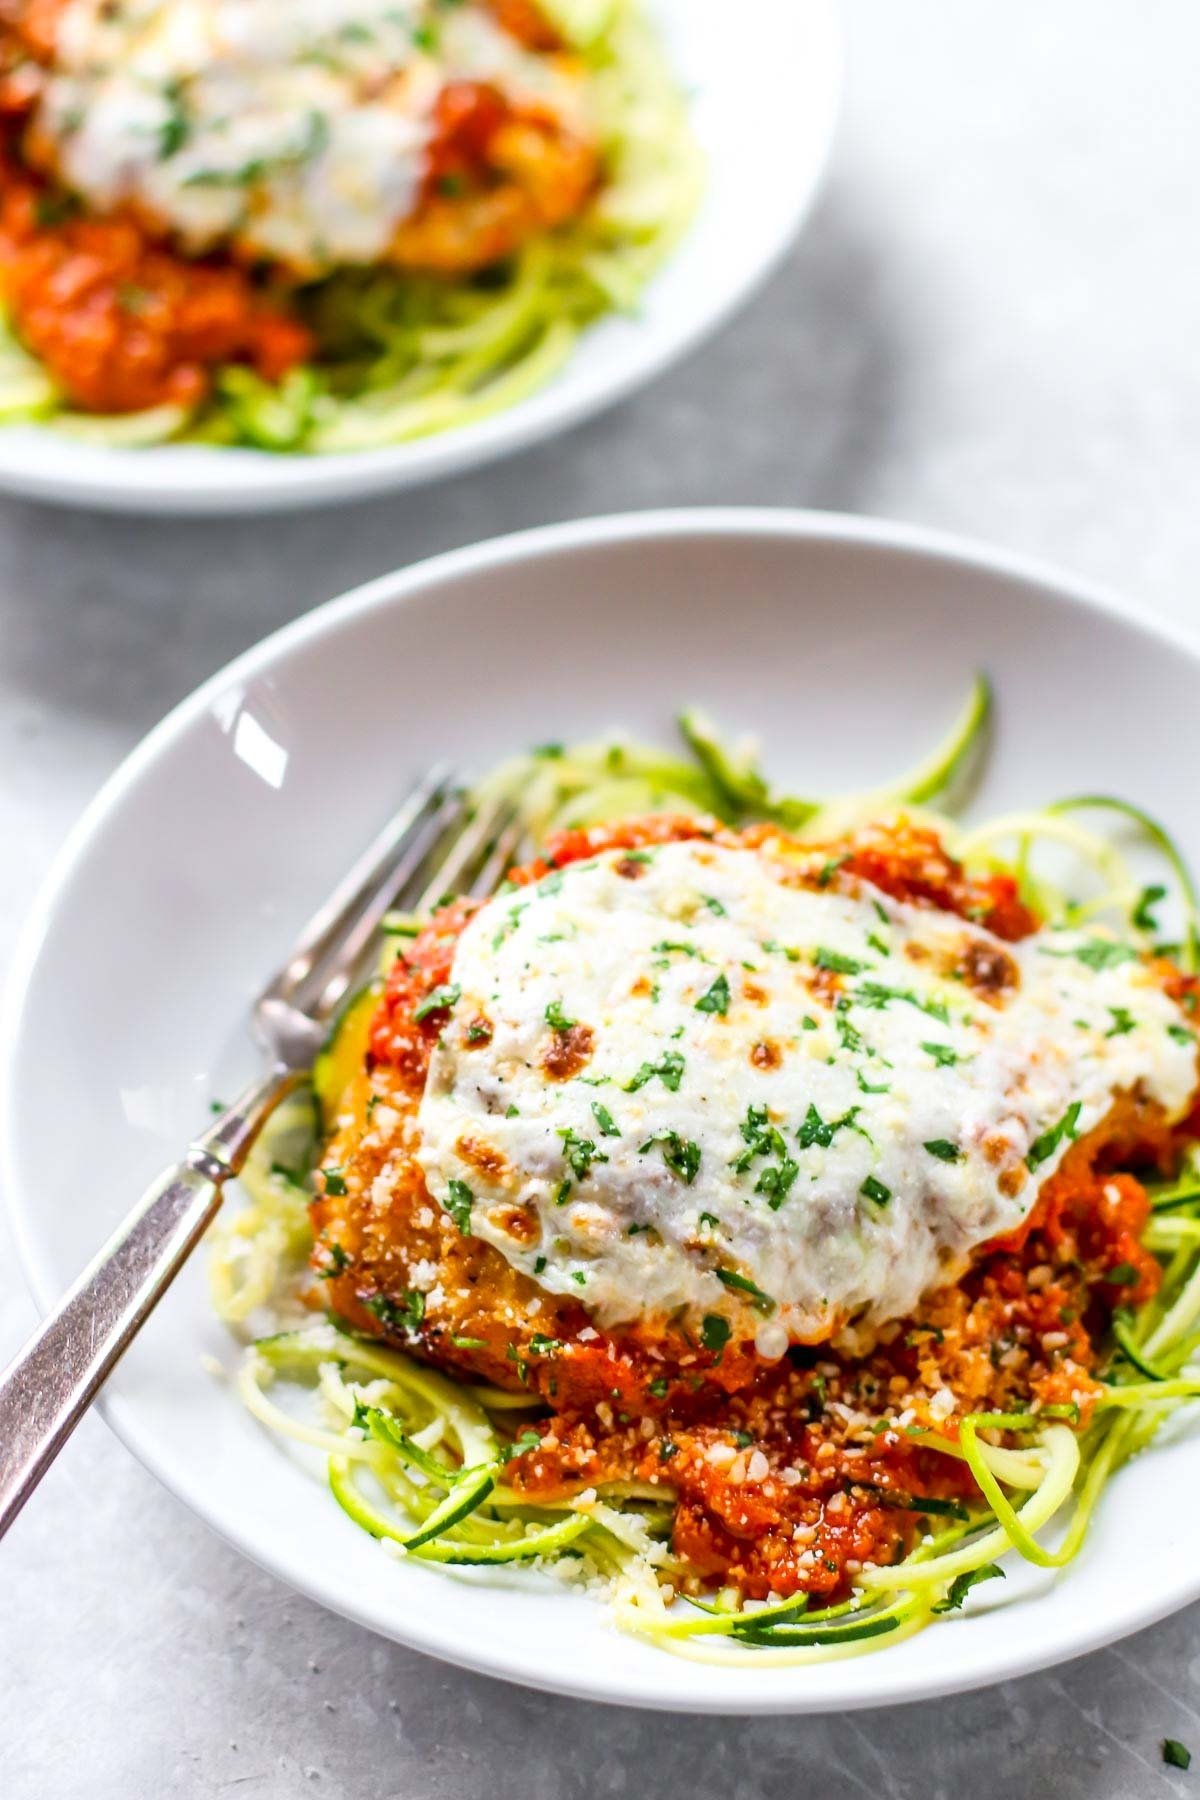 10 Famous Light Dinner Ideas For Summer 27 healthy zucchini noodle recipes to keep you light 2022